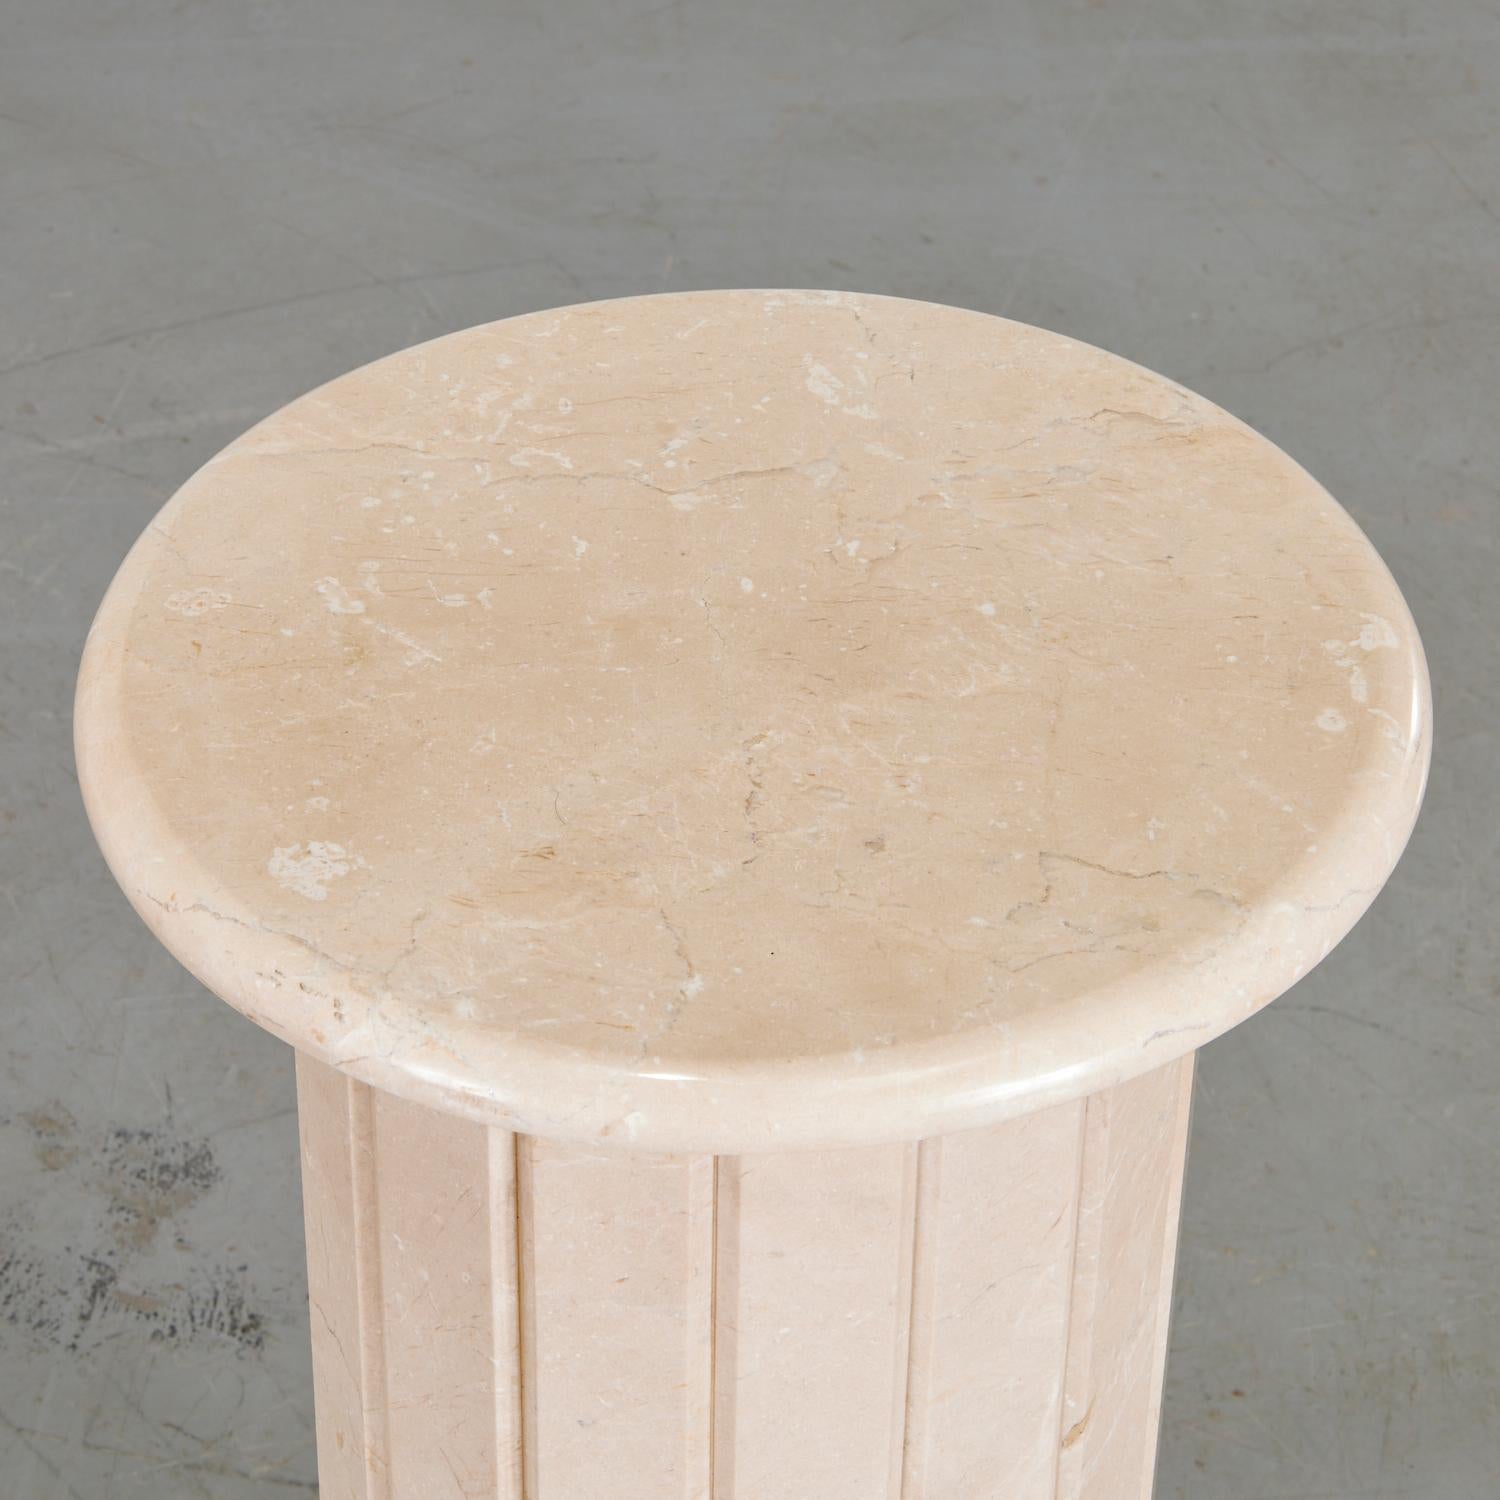 A modern Travertine fluted column pedestal. The pedestal has been polished to allow the wonderful soft pale earth tones to shine. This is a very smart looking pedestal that could serve many purposes.This pedestal could be used as an end table, for